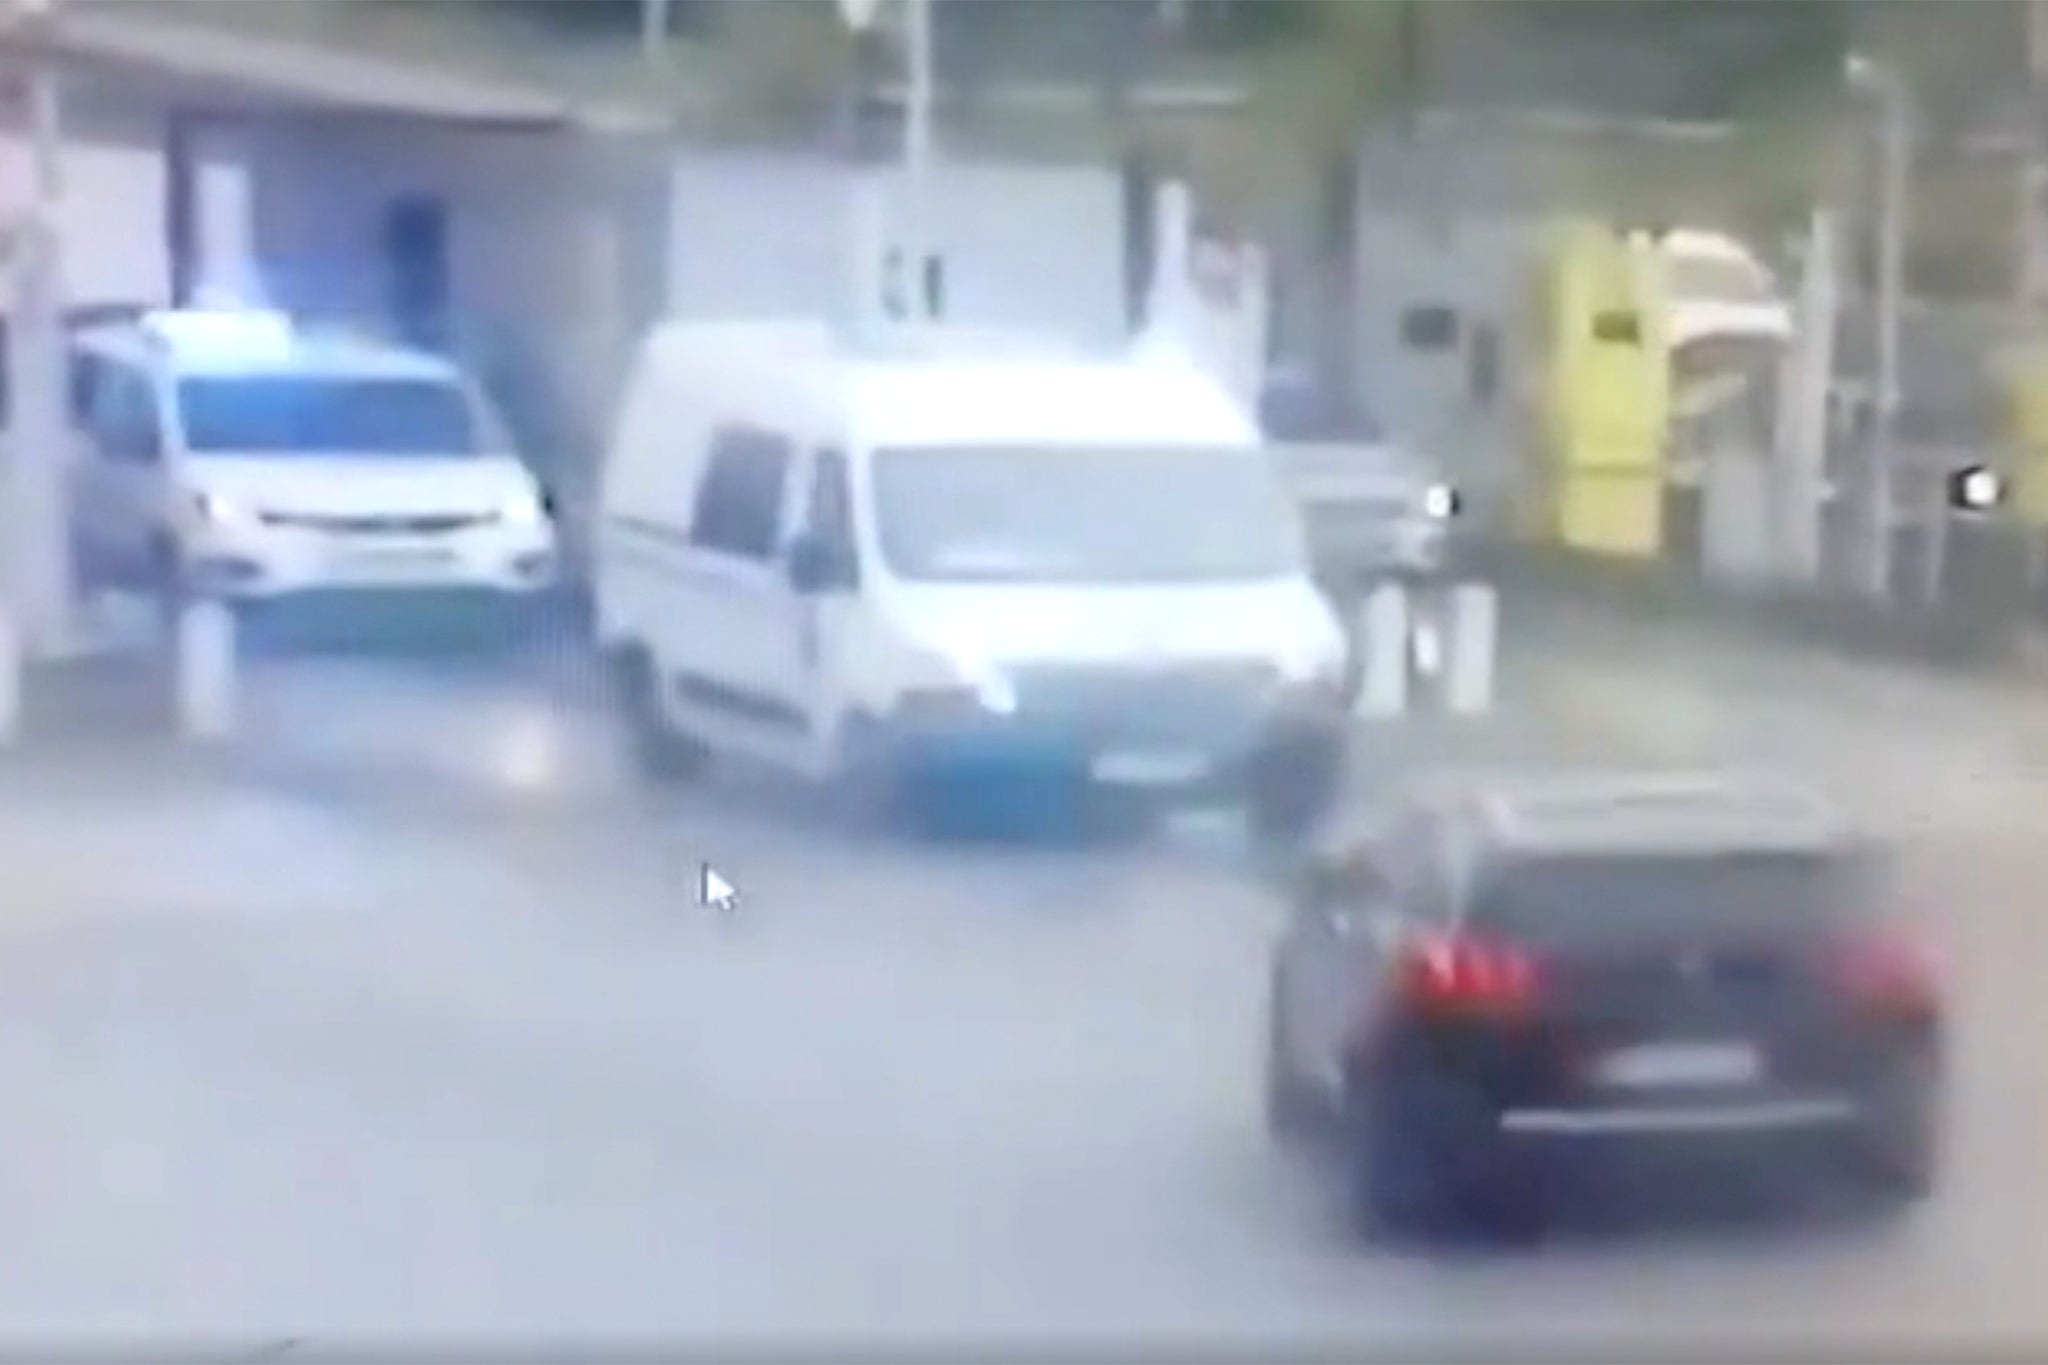 The moment a car rammed into the police van carrying the ‘Fly’